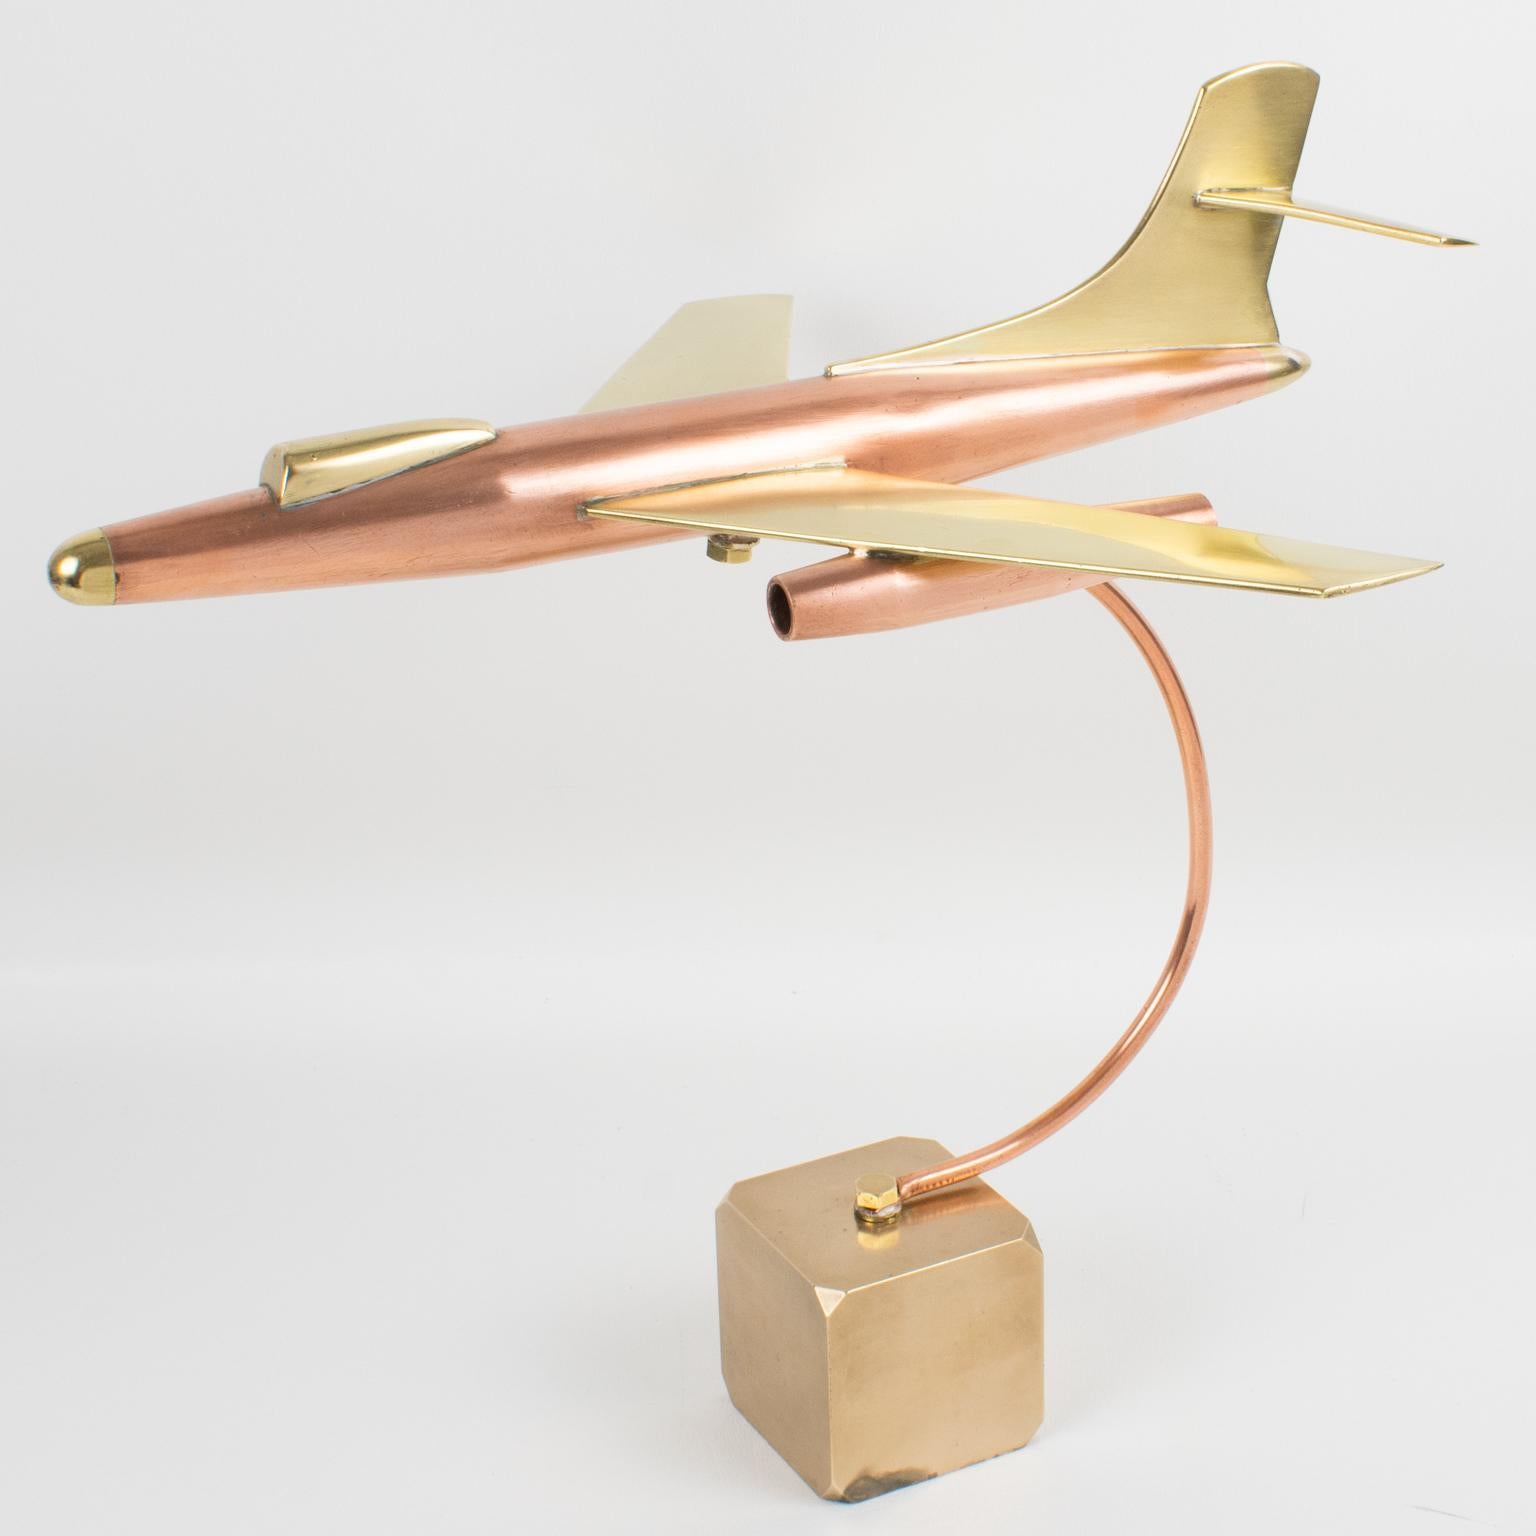 Stunning large brass and copper airplane model, made in France, circa 1960. Featuring an impressive all-metal jet plane model on a thick solid brass cube base. Great desk accessory for aviation collectors and lovers. 
Measurements: 
Overall: 11.82